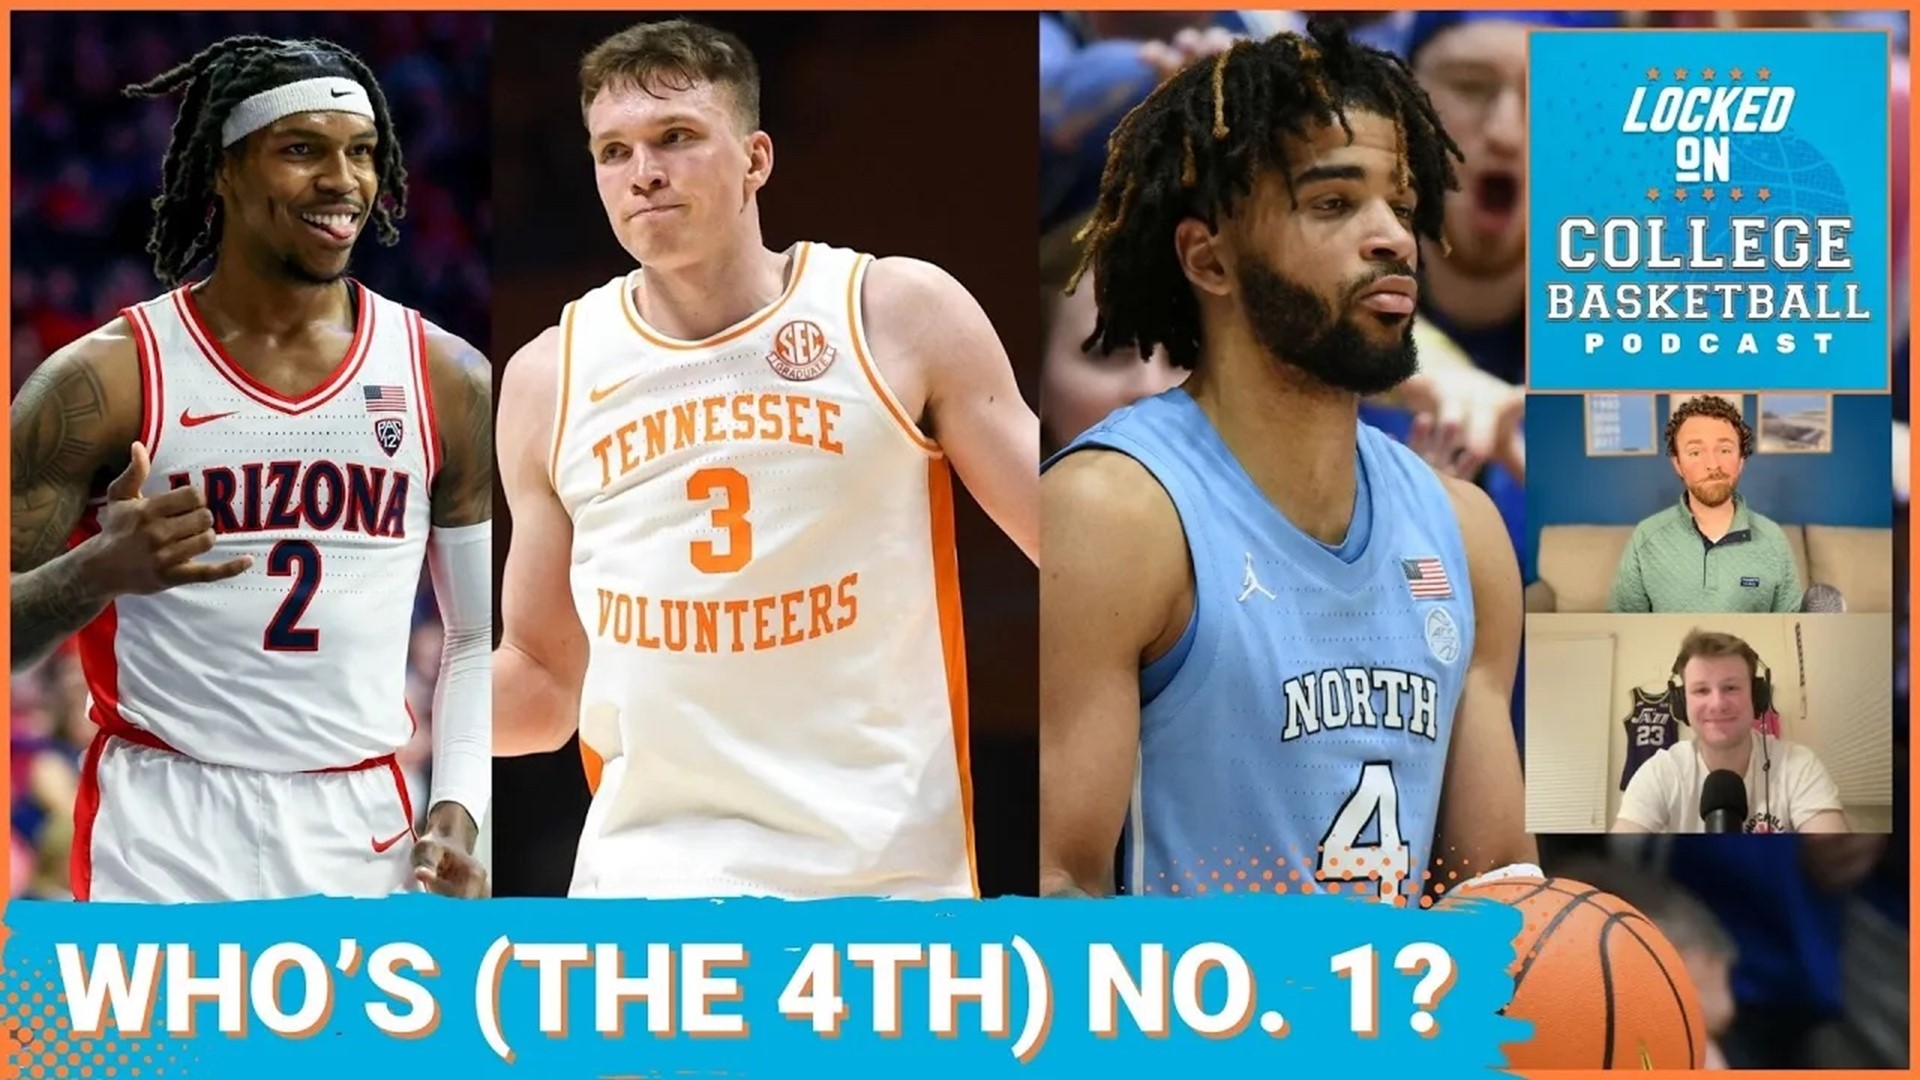 Following UNC’s victory over Duke this weekend, Tennessee’s loss to Kentucky, and Arizona’s loss at USC, who should get the fourth one-seed?